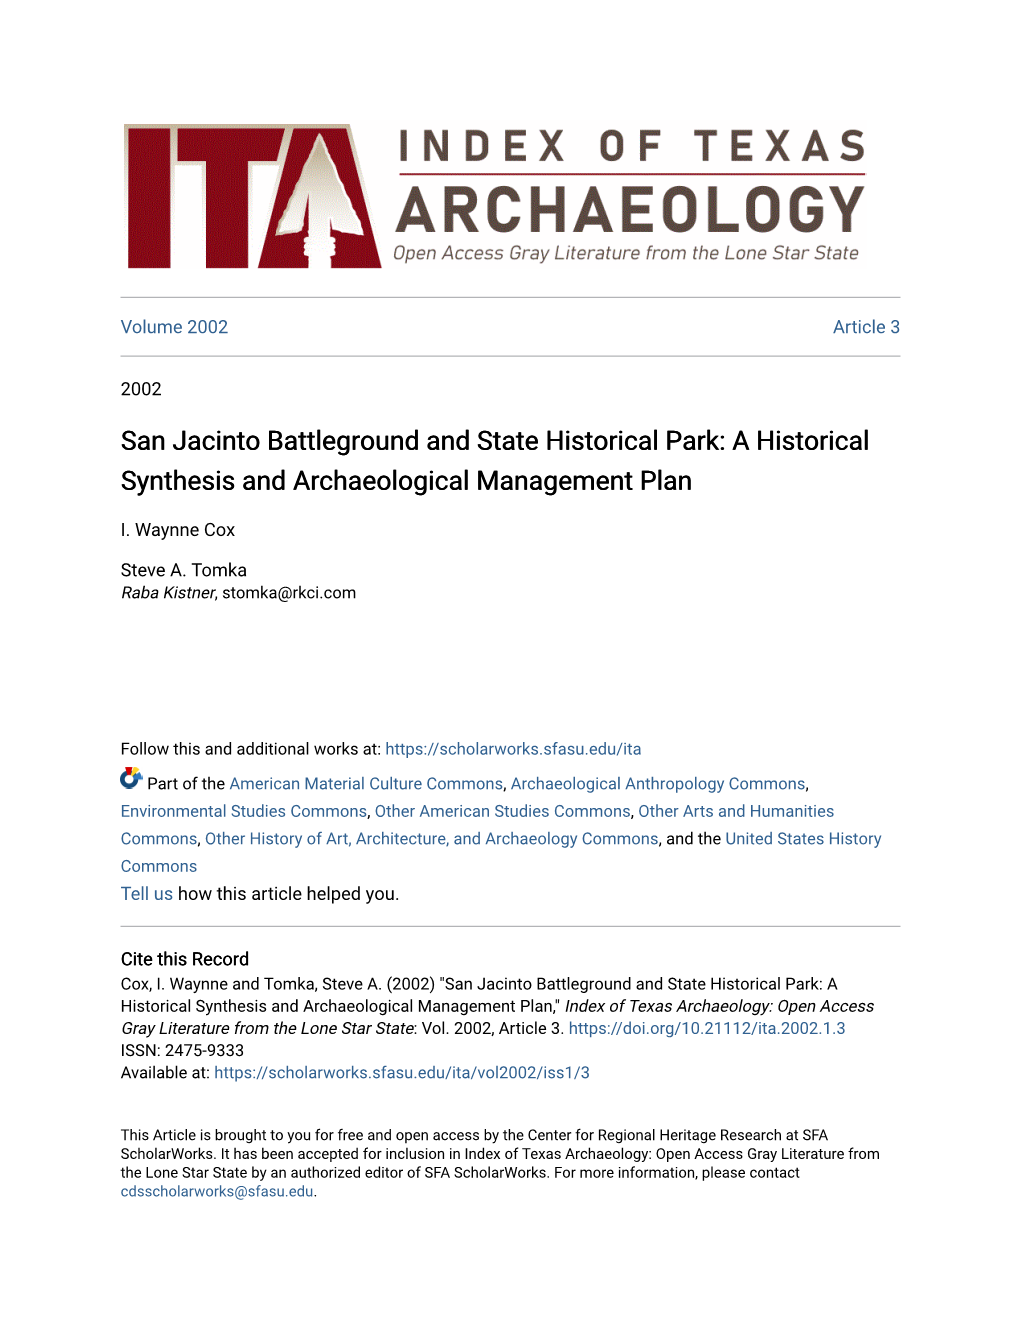 San Jacinto Battleground and State Historical Park: a Historical Synthesis and Archaeological Management Plan